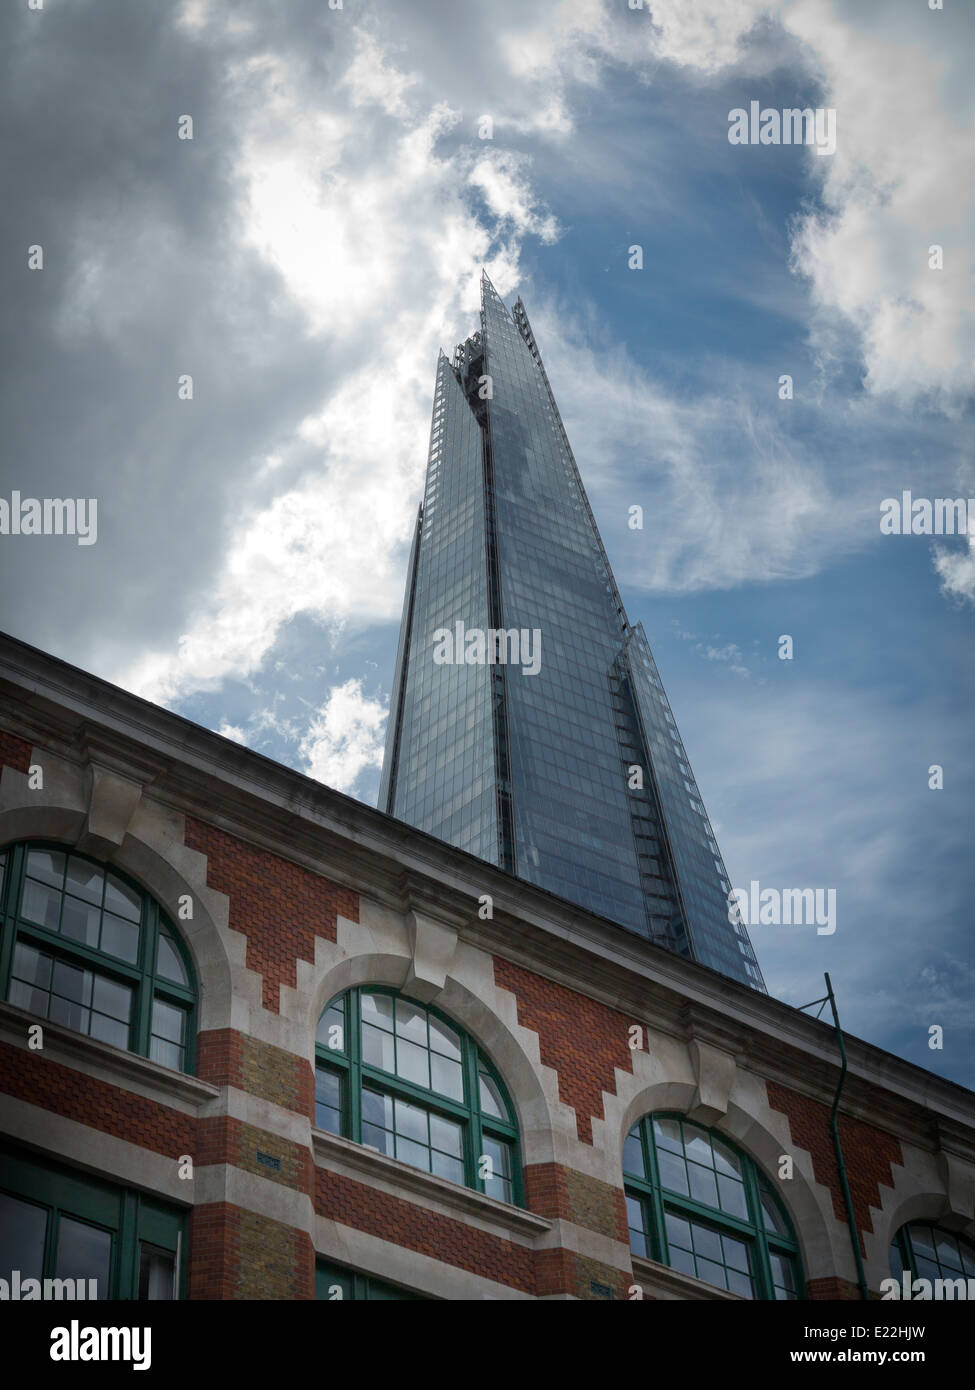 A wide angle of The London Shard against a dramatic blue and white sky with brick building with arched windows in foreground Stock Photo